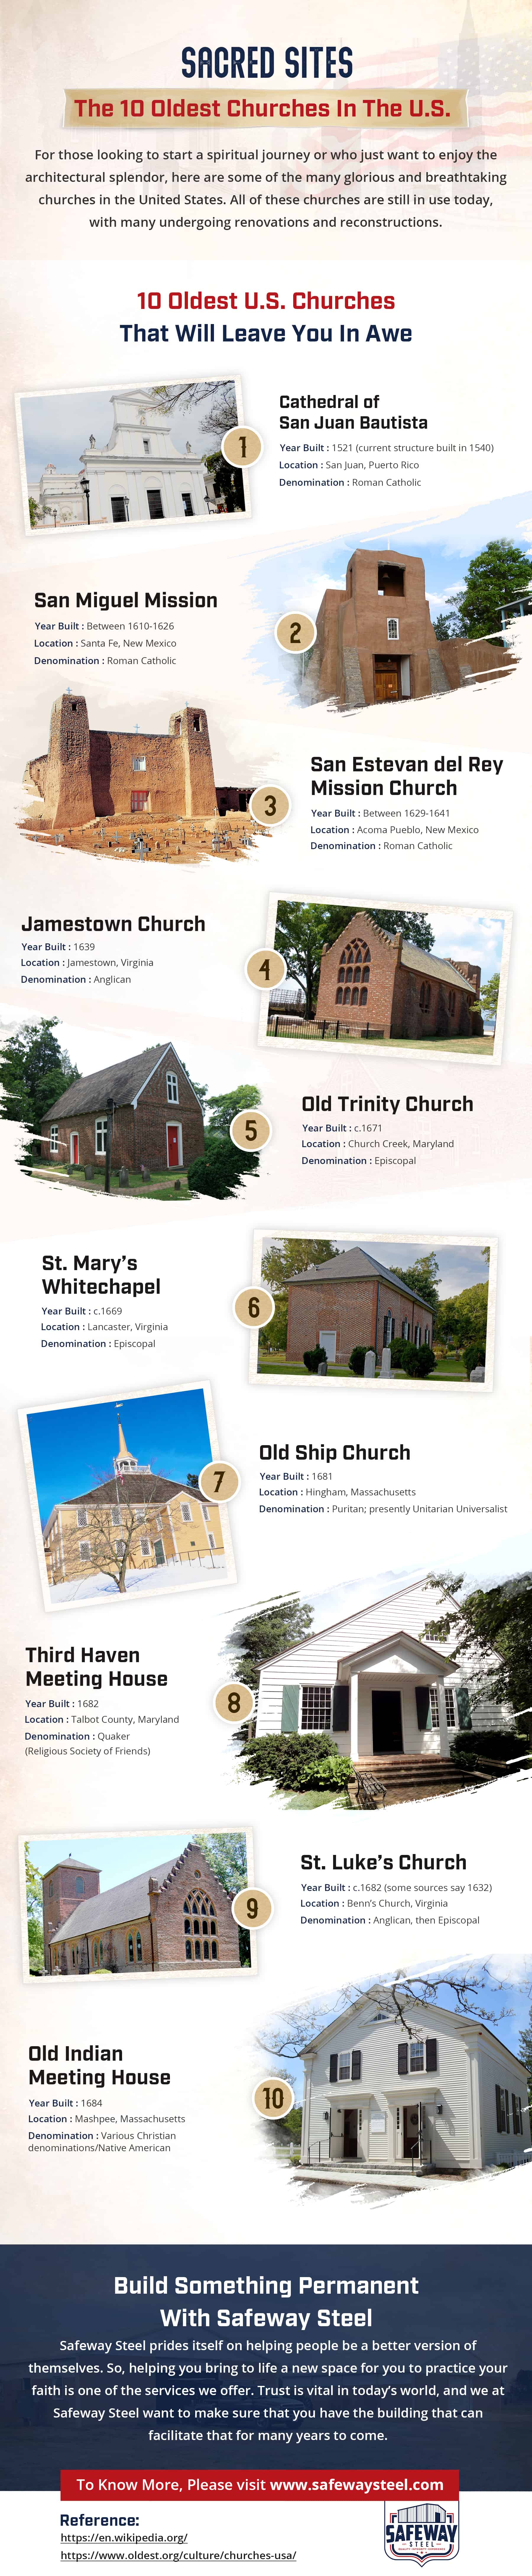 sacred-sites-the-10-oldest-churches-in-the-u-s